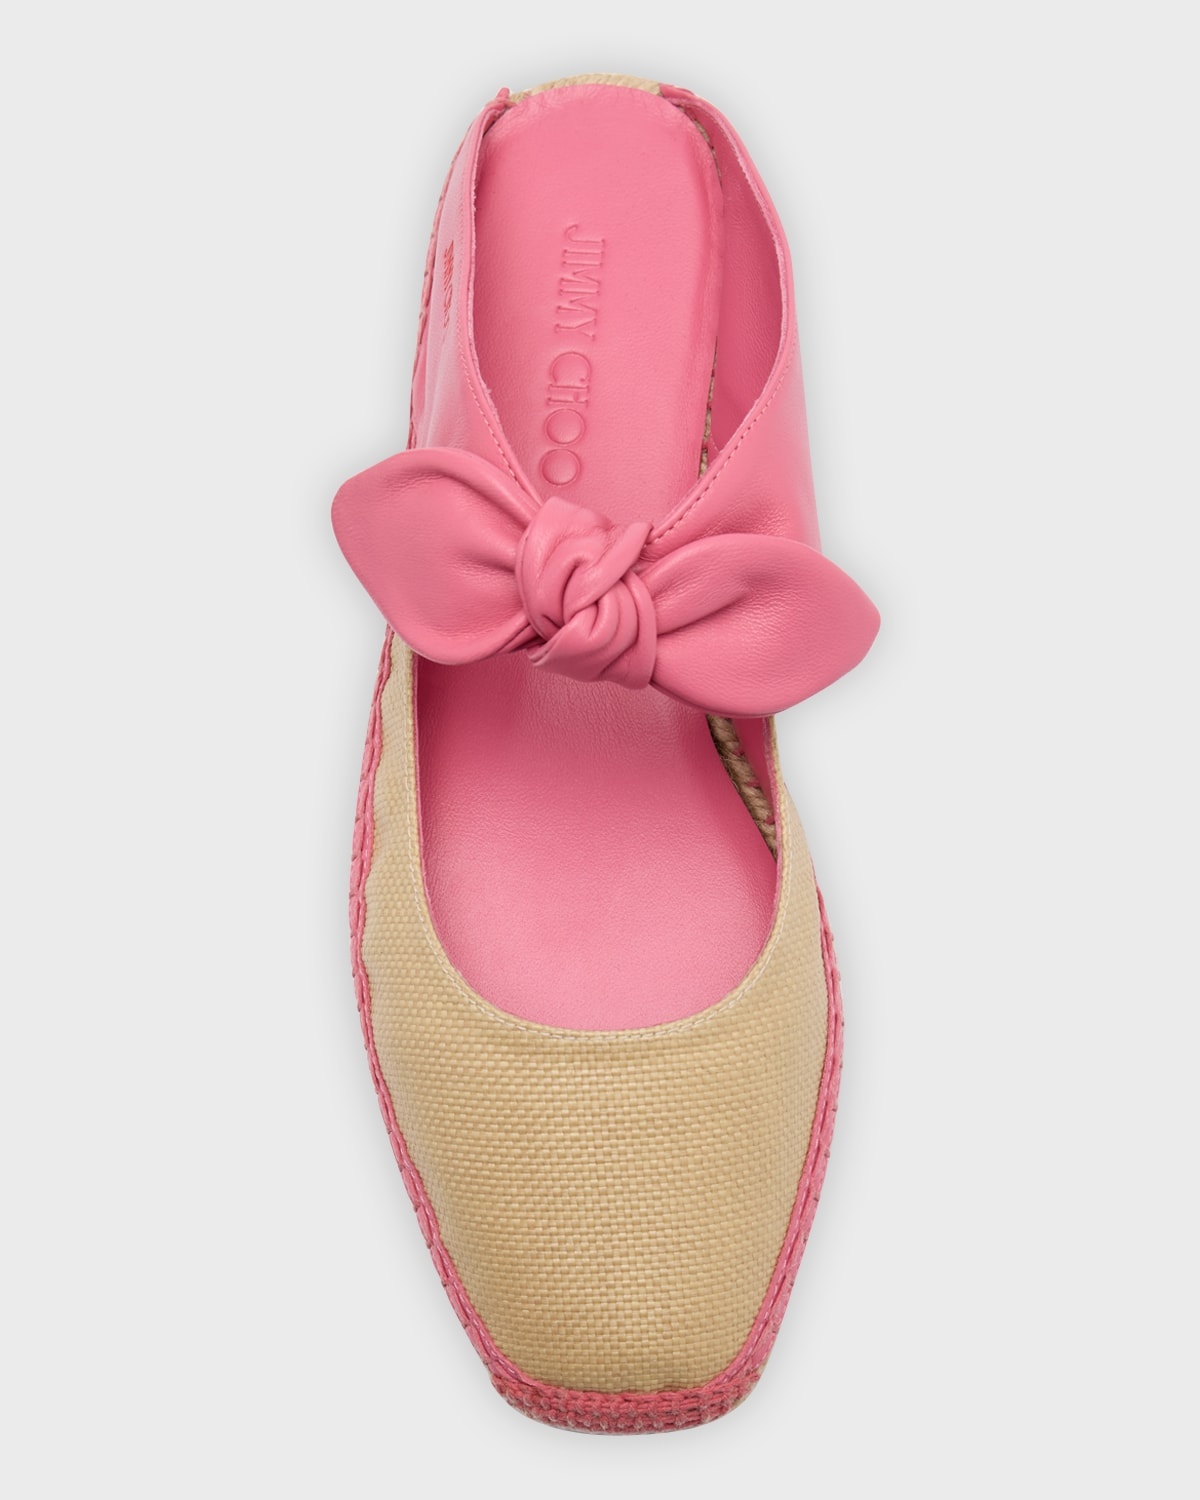 Reka Knotted Bow Espadrille Mules - 5